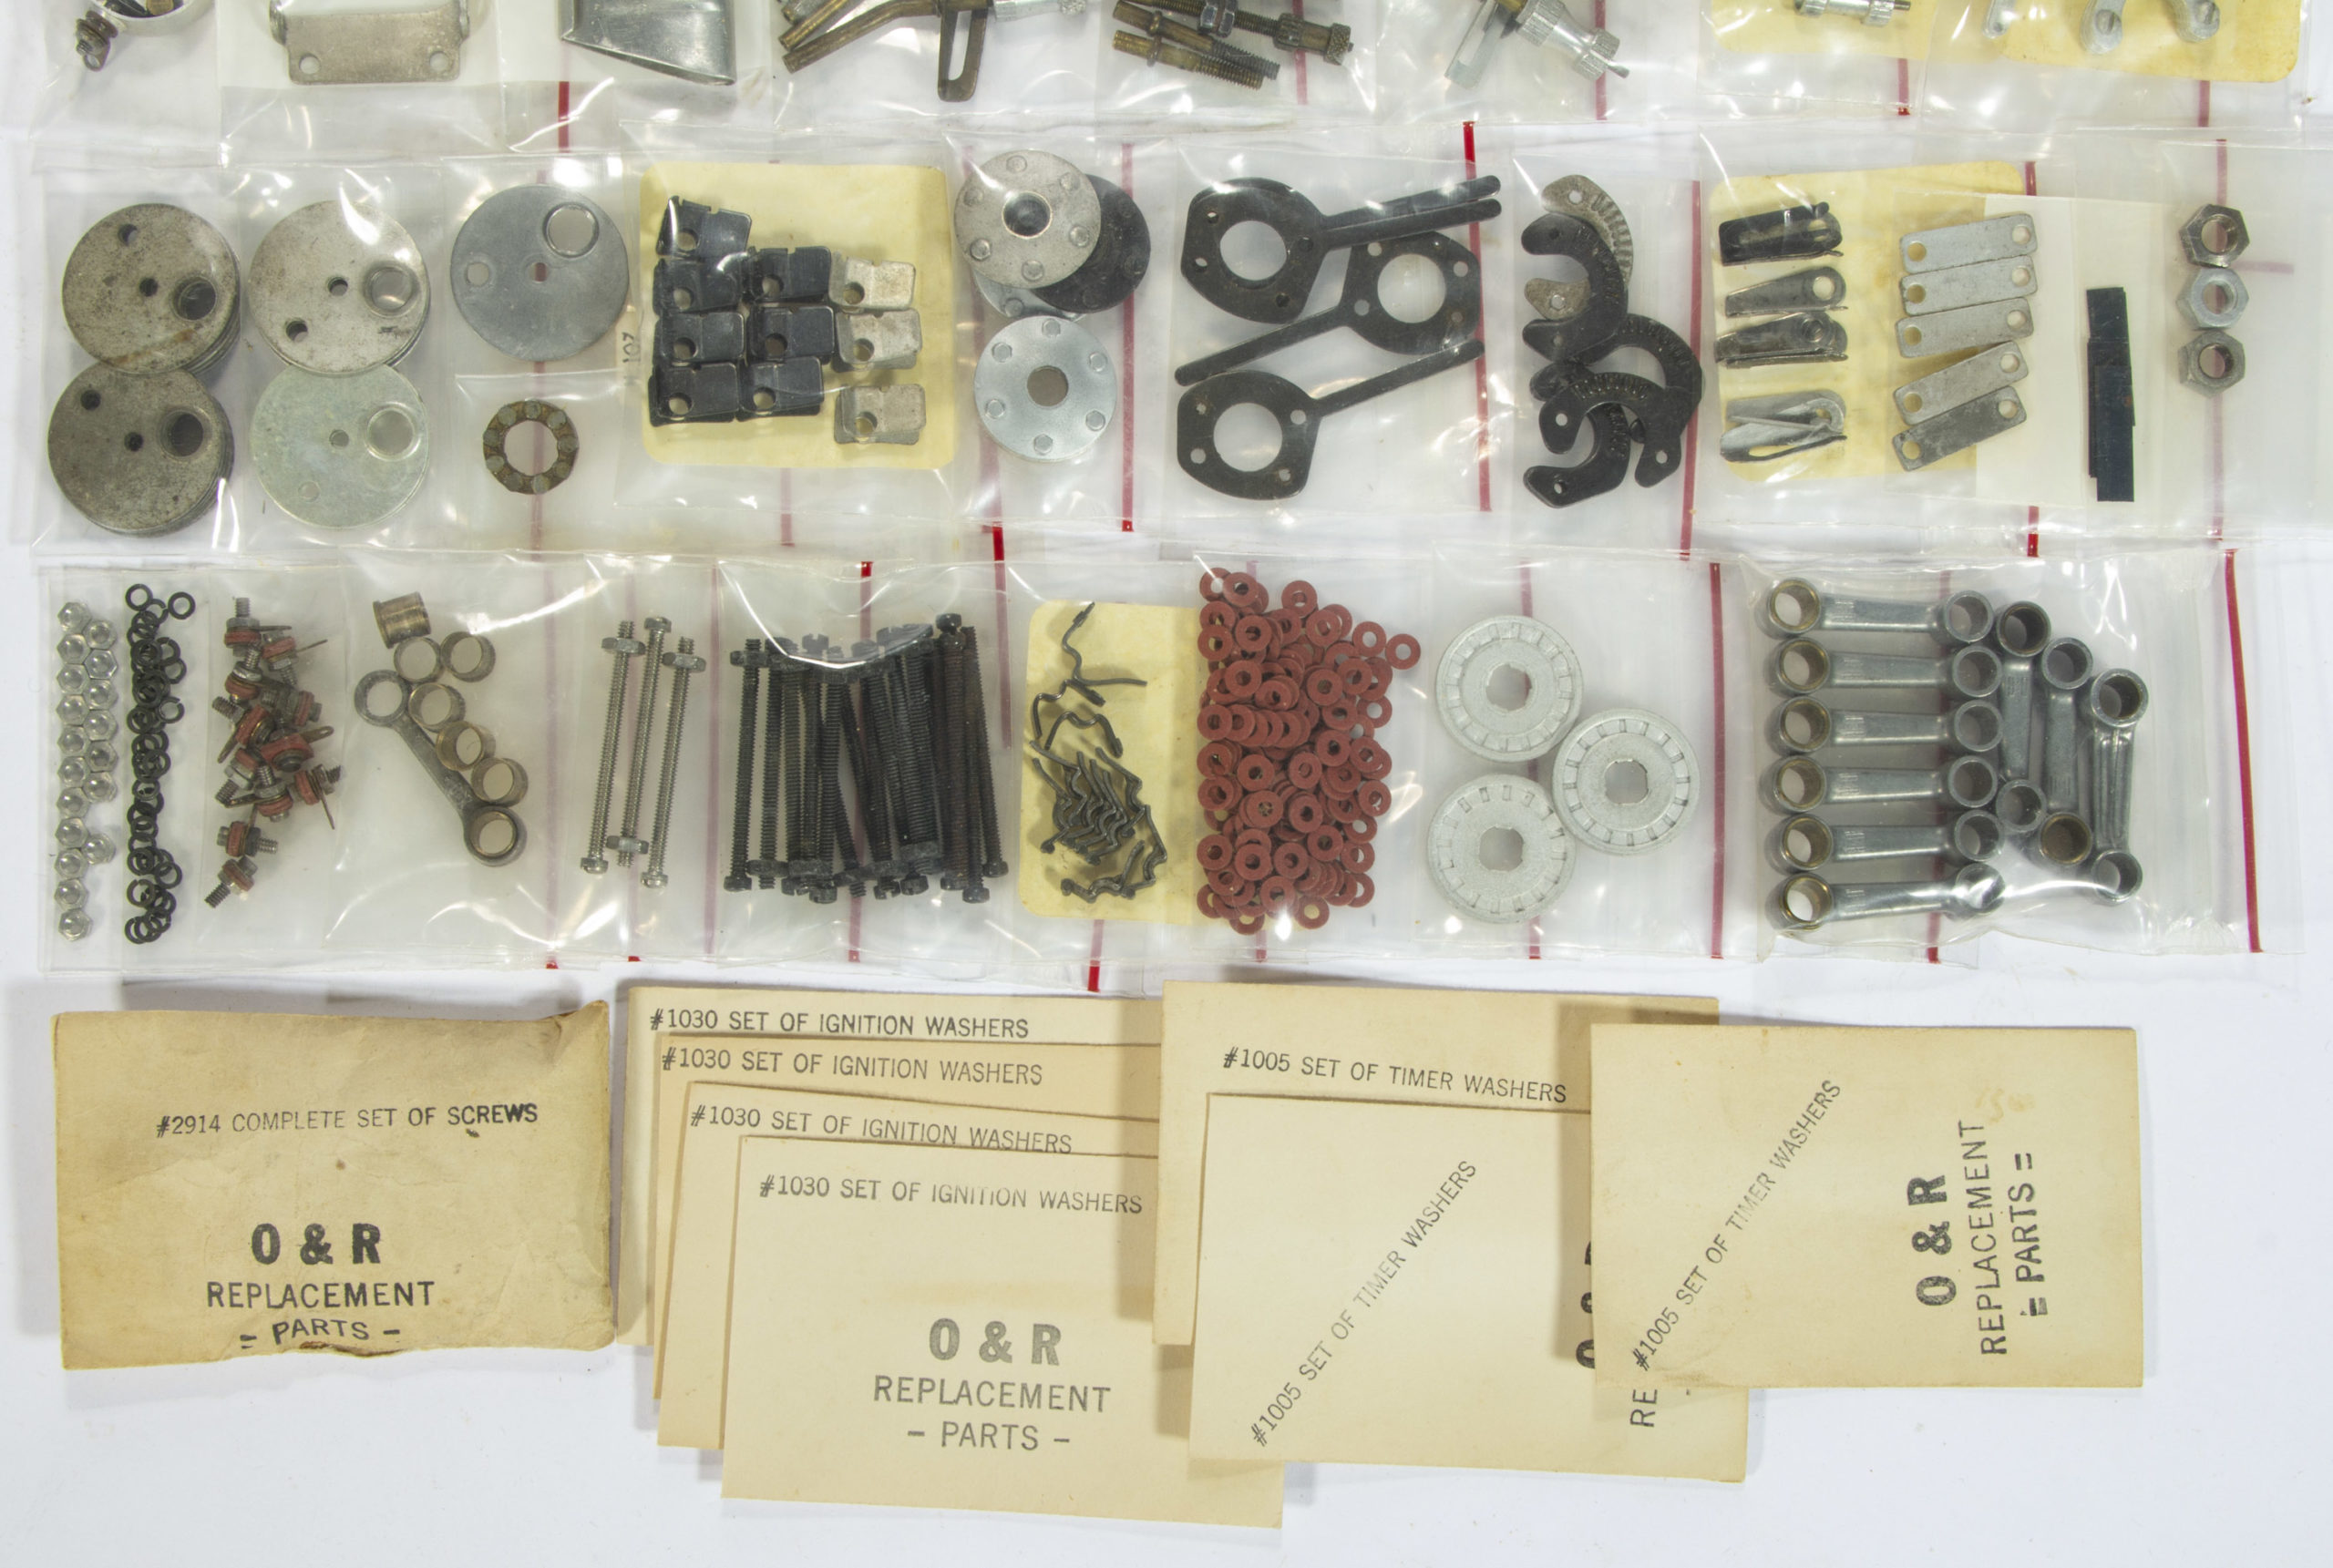 OHLSSON & RICE (O & R) ASSORTED MODEL AIRPLANE ENGINES AND PARTS, UNCOUNTED LOT,